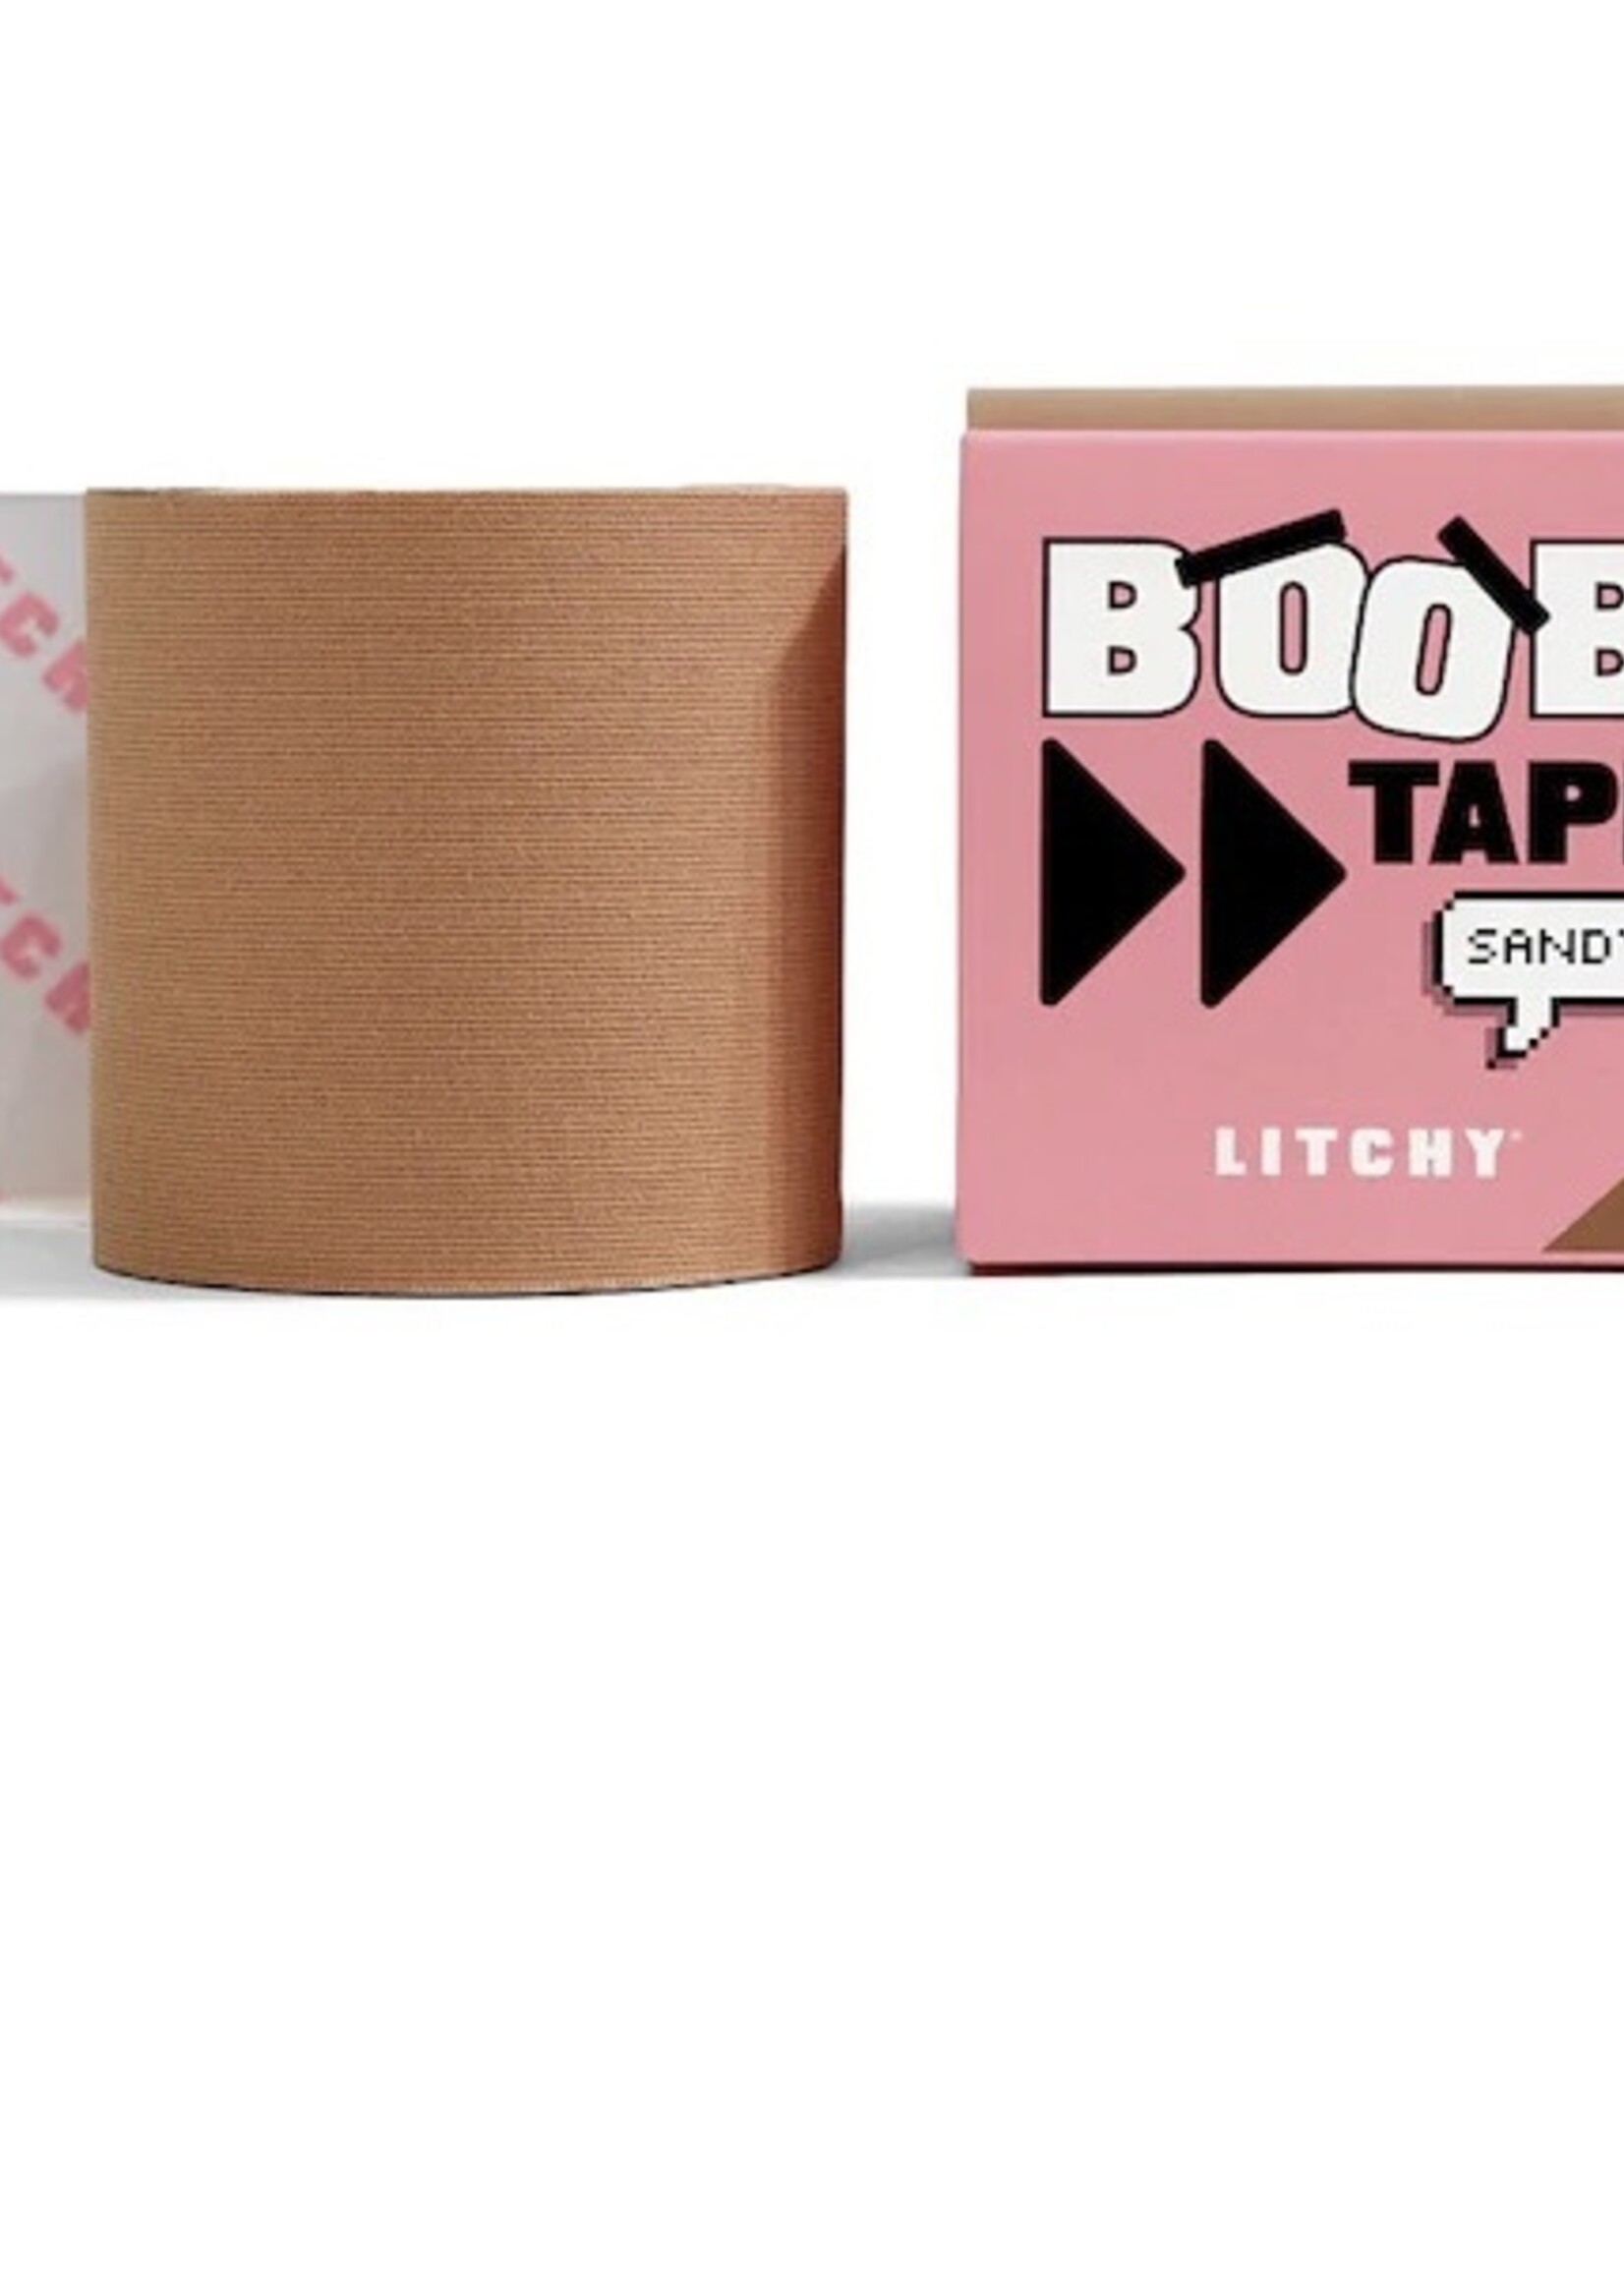 Litchy Litchy Boob tape Sandy